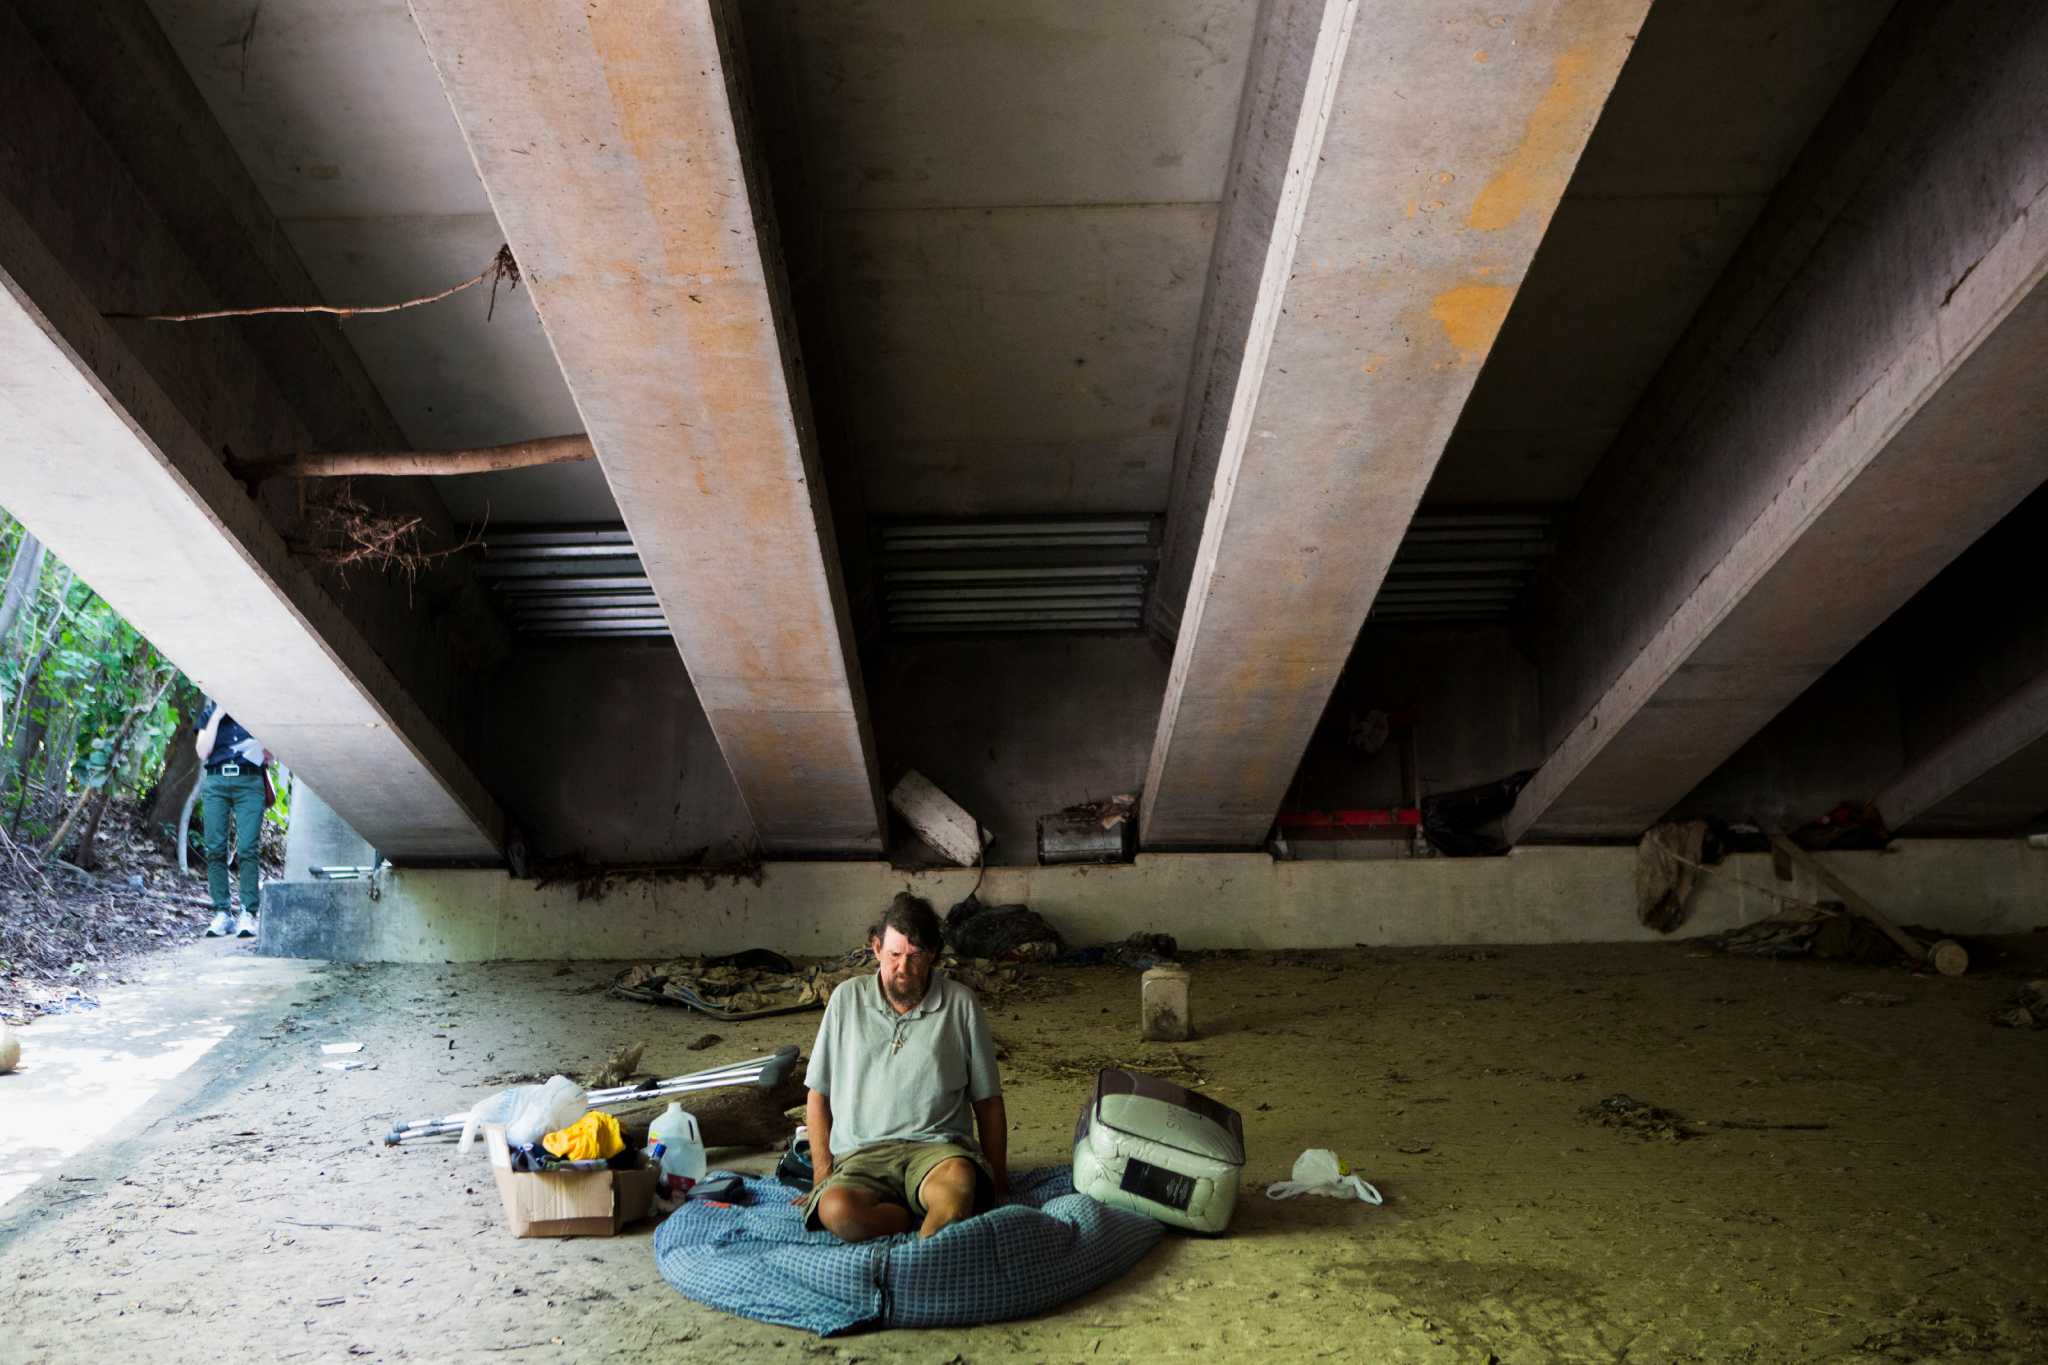 Houston-area homelessness down slightly, especially in key group